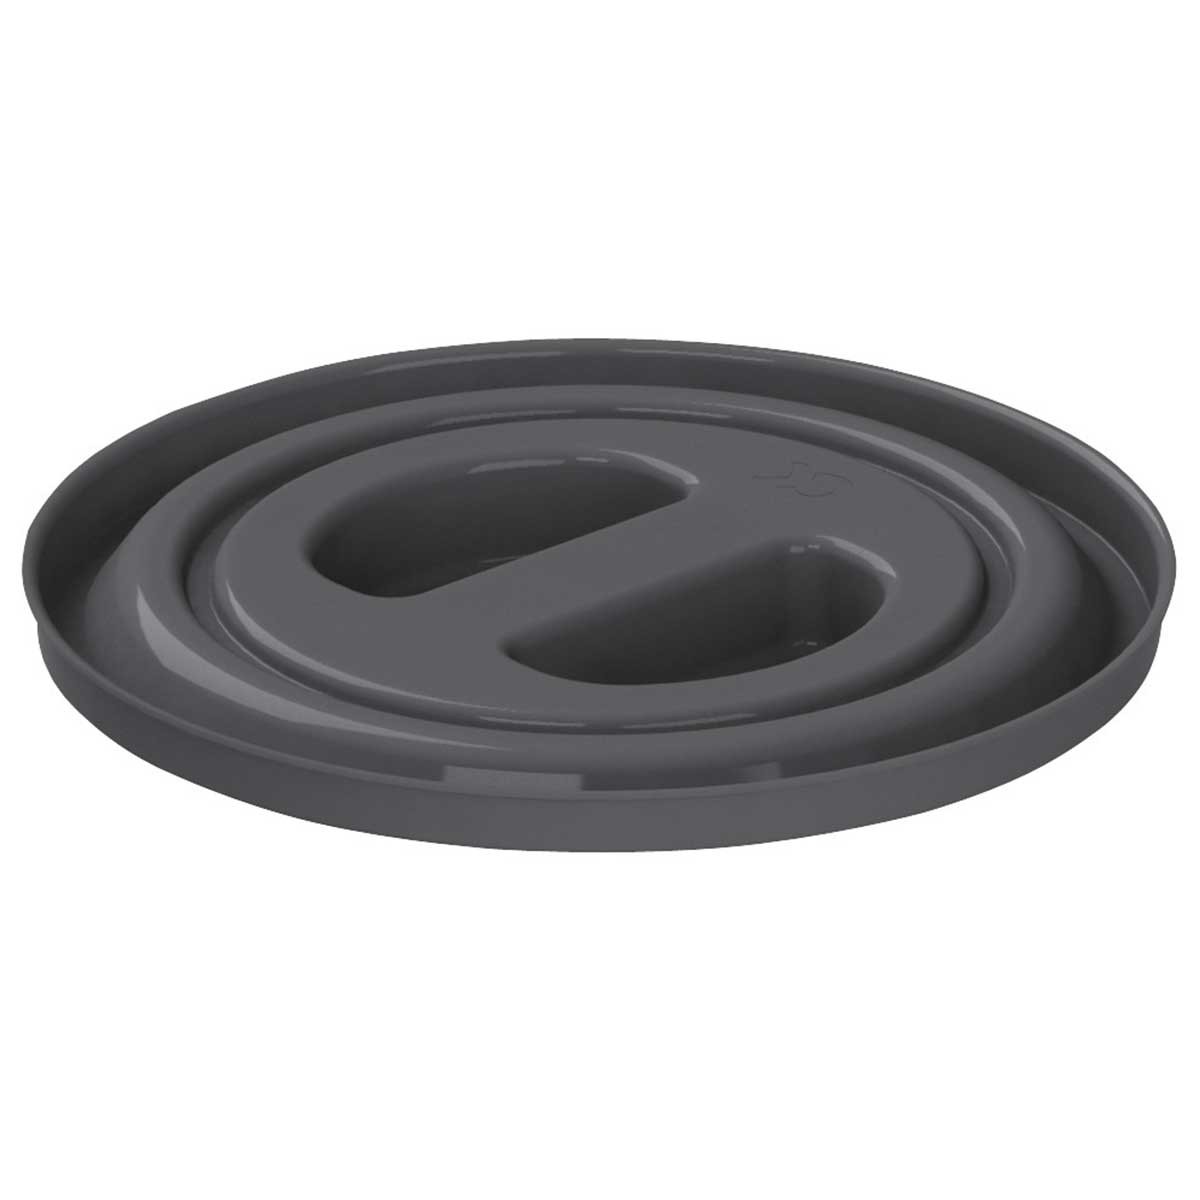 Lid for bucket 29881 and 323505 black